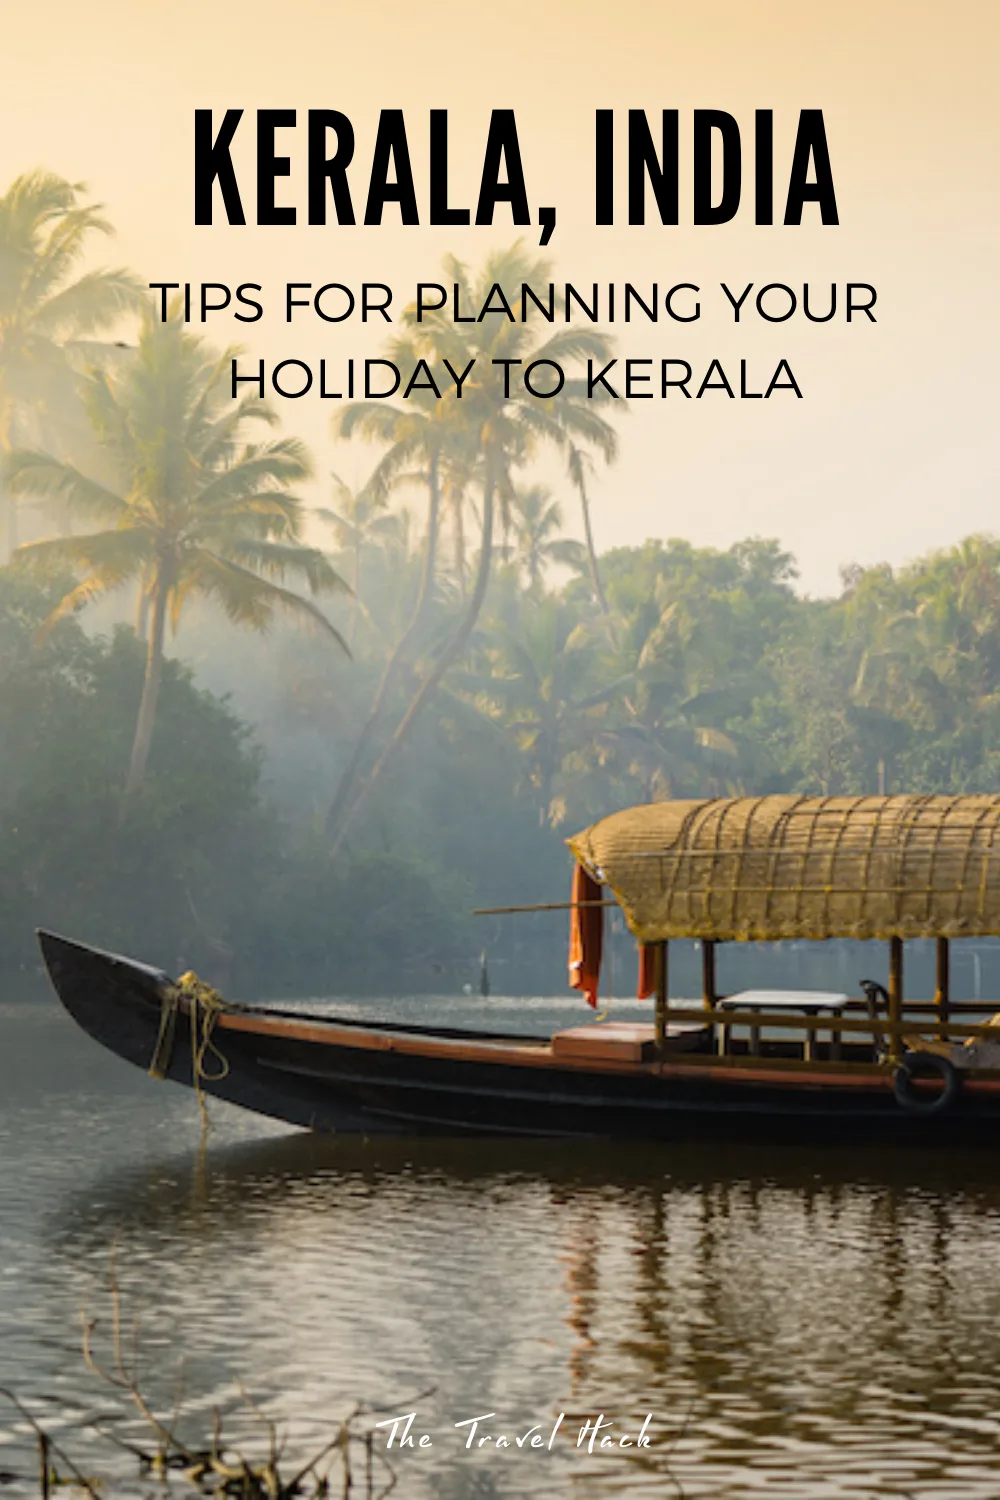 How to plan a holiday to Kerala, India